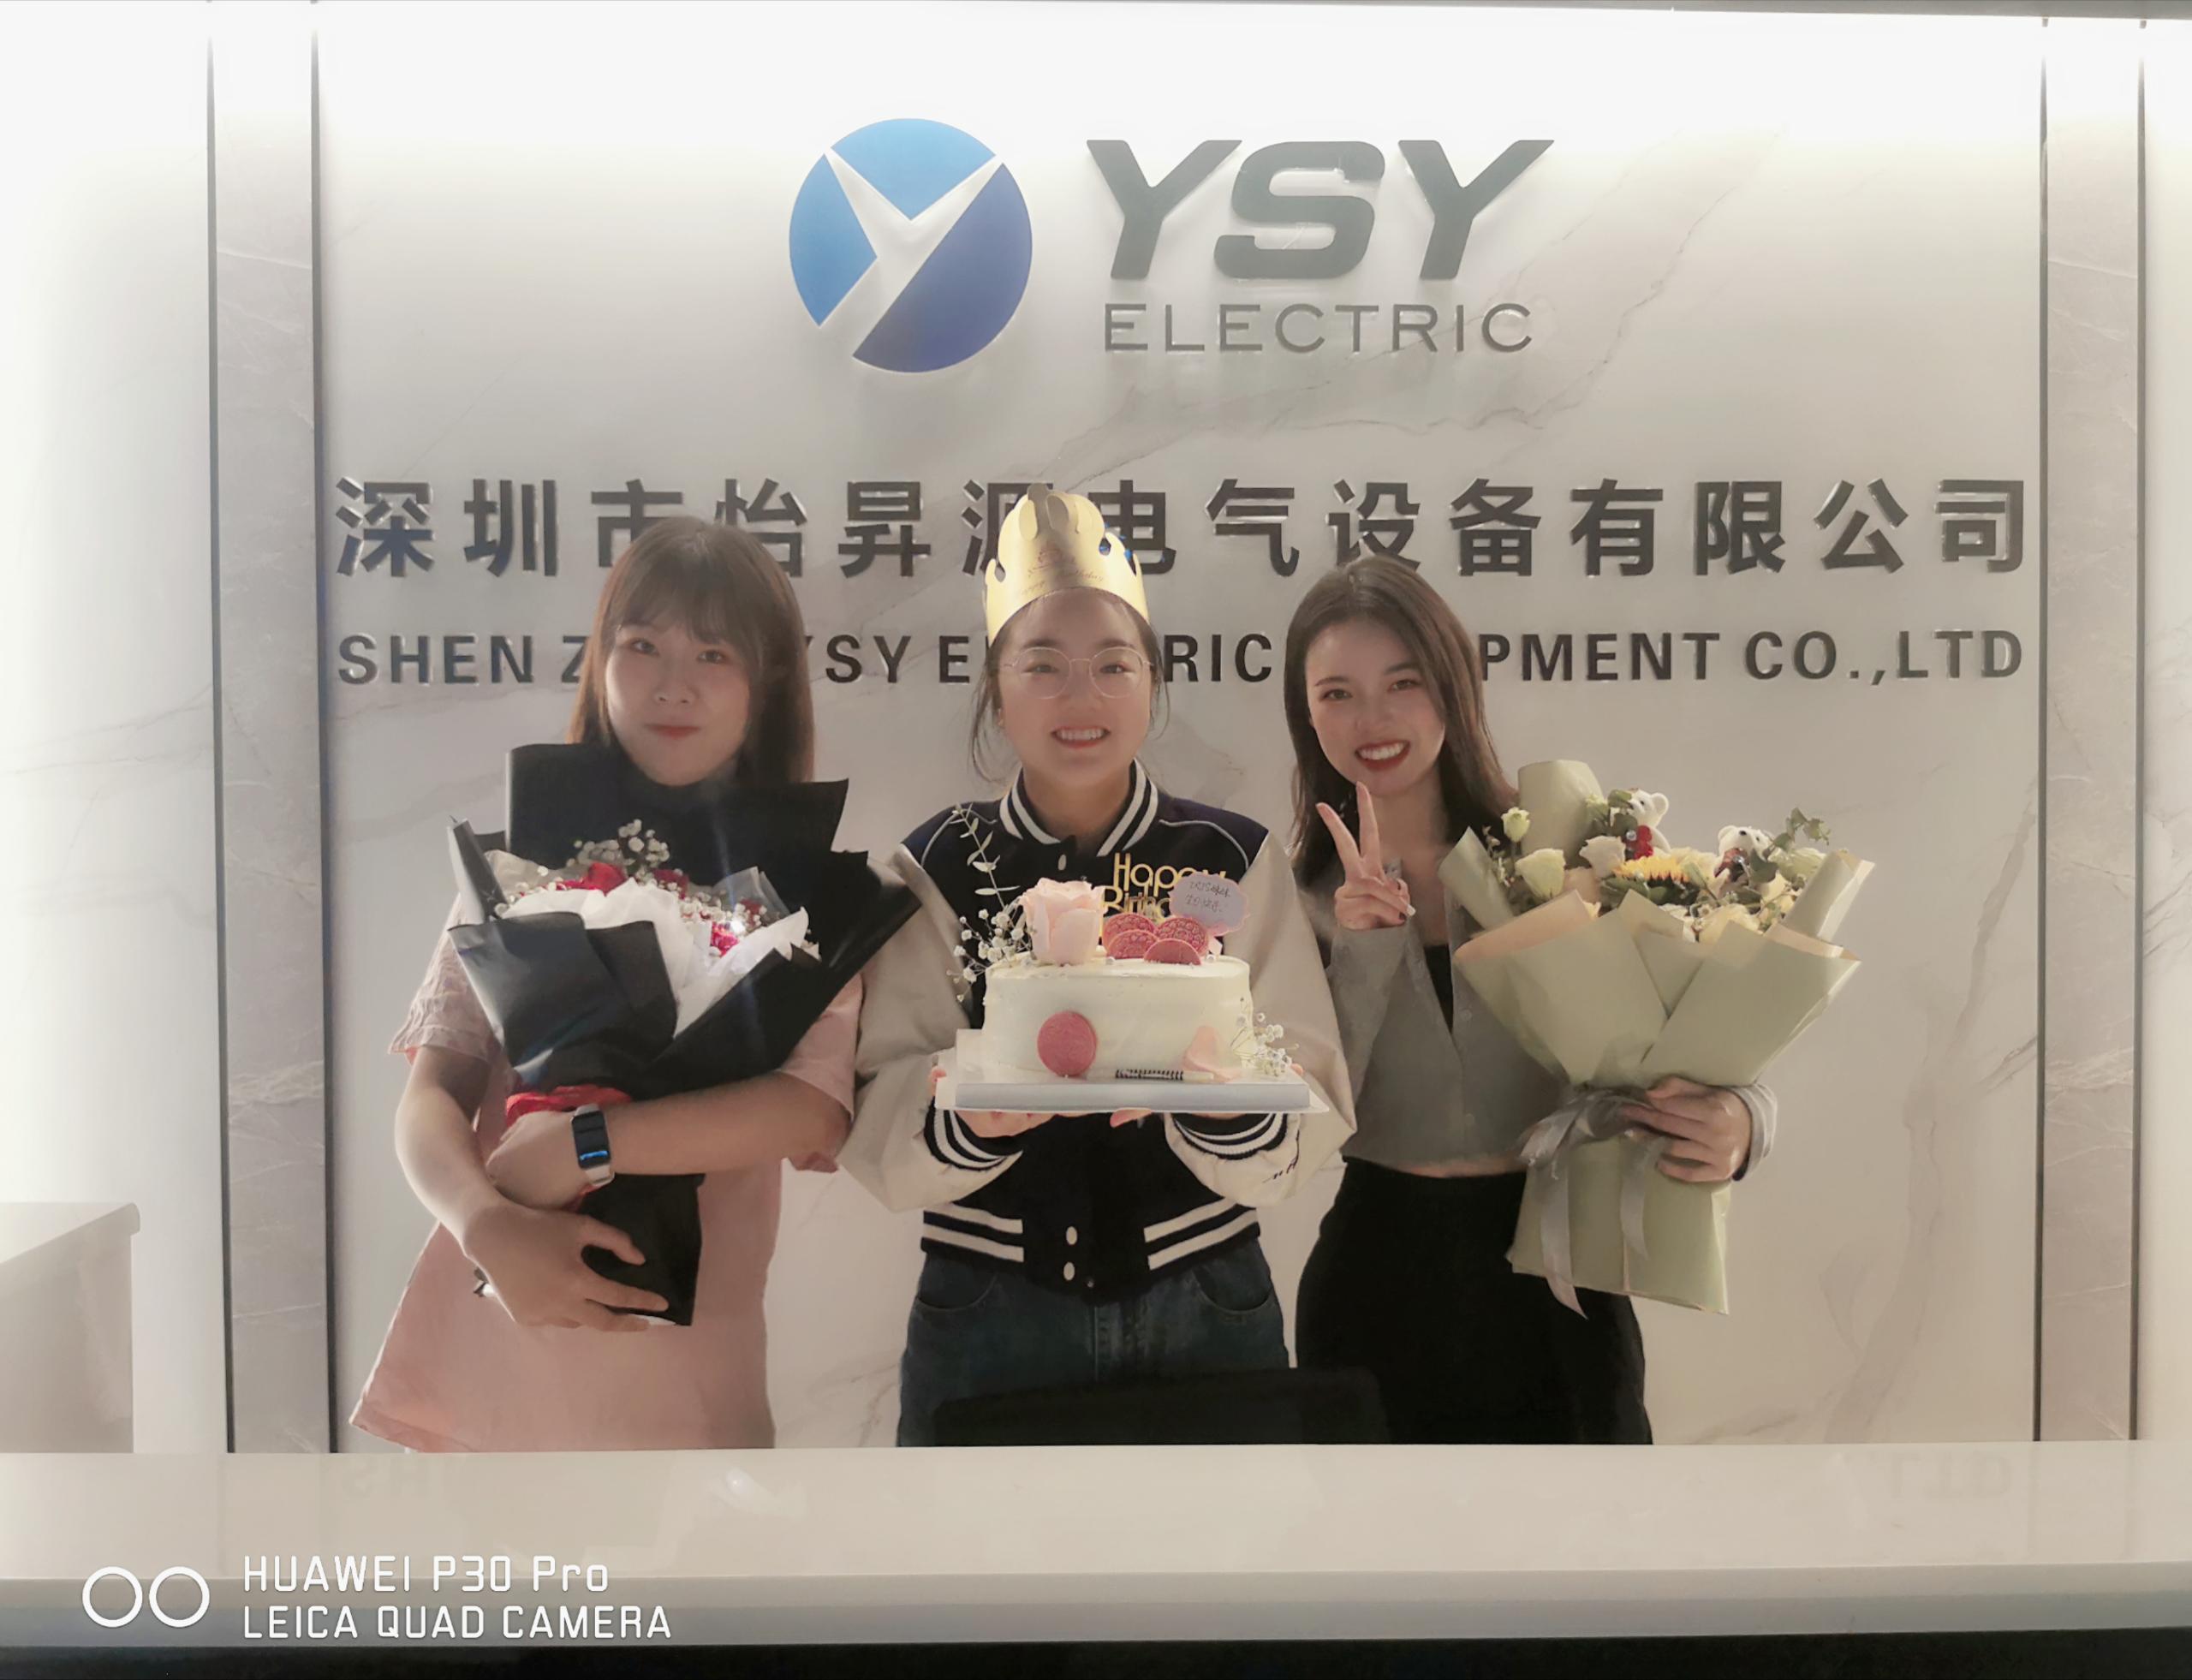 Happy birthday to 2 sales of YSY Electric!